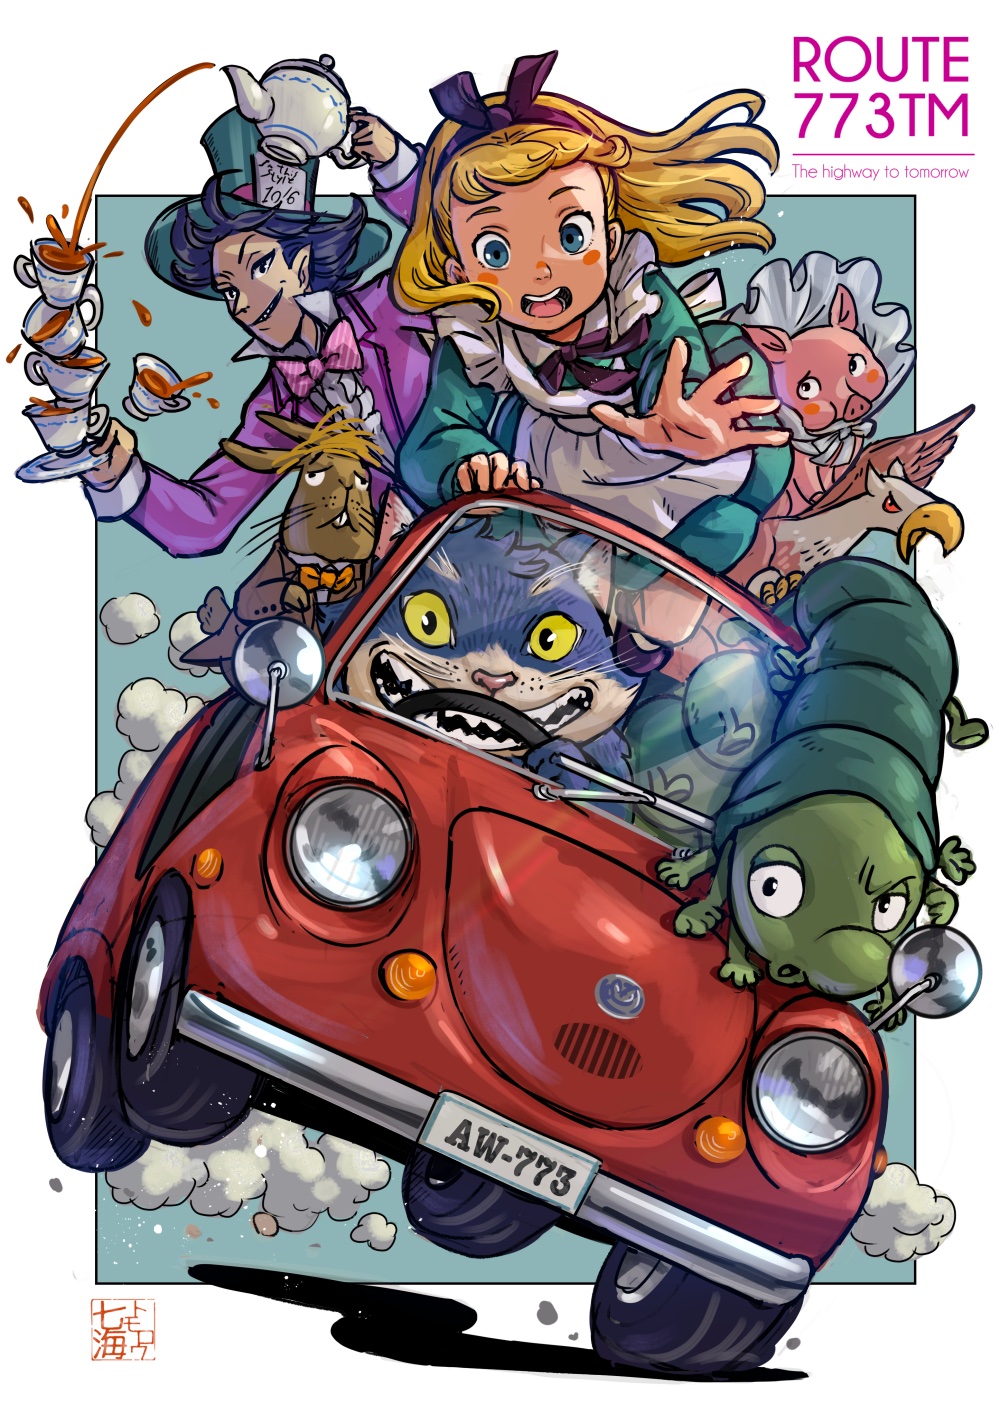 1girl 4boys alice_(alice_in_wonderland) alice_in_wonderland apron aqua_dress aqua_hat blonde_hair blue_background blue_eyes blush_stickers bonnet border bow bow_hairband bowtie car cat caterpillar caterpillar_(alice_in_wonderland) cheshire_cat_(alice_in_wonderland) cup dress driving english_text griffin hairband hat highres holding holding_cup holding_teapot license_plate long_hair long_sleeves mad_hatter_(alice_in_wonderland) march_hare_(alice_in_wonderland) motor_vehicle multiple_boys nanami_tomorou open_mouth orange_bow orange_bowtie outside_border pig pouring purple_bow purple_bowtie purple_suit rabbit reaching suit tea teapot top_hat whiskers white_border